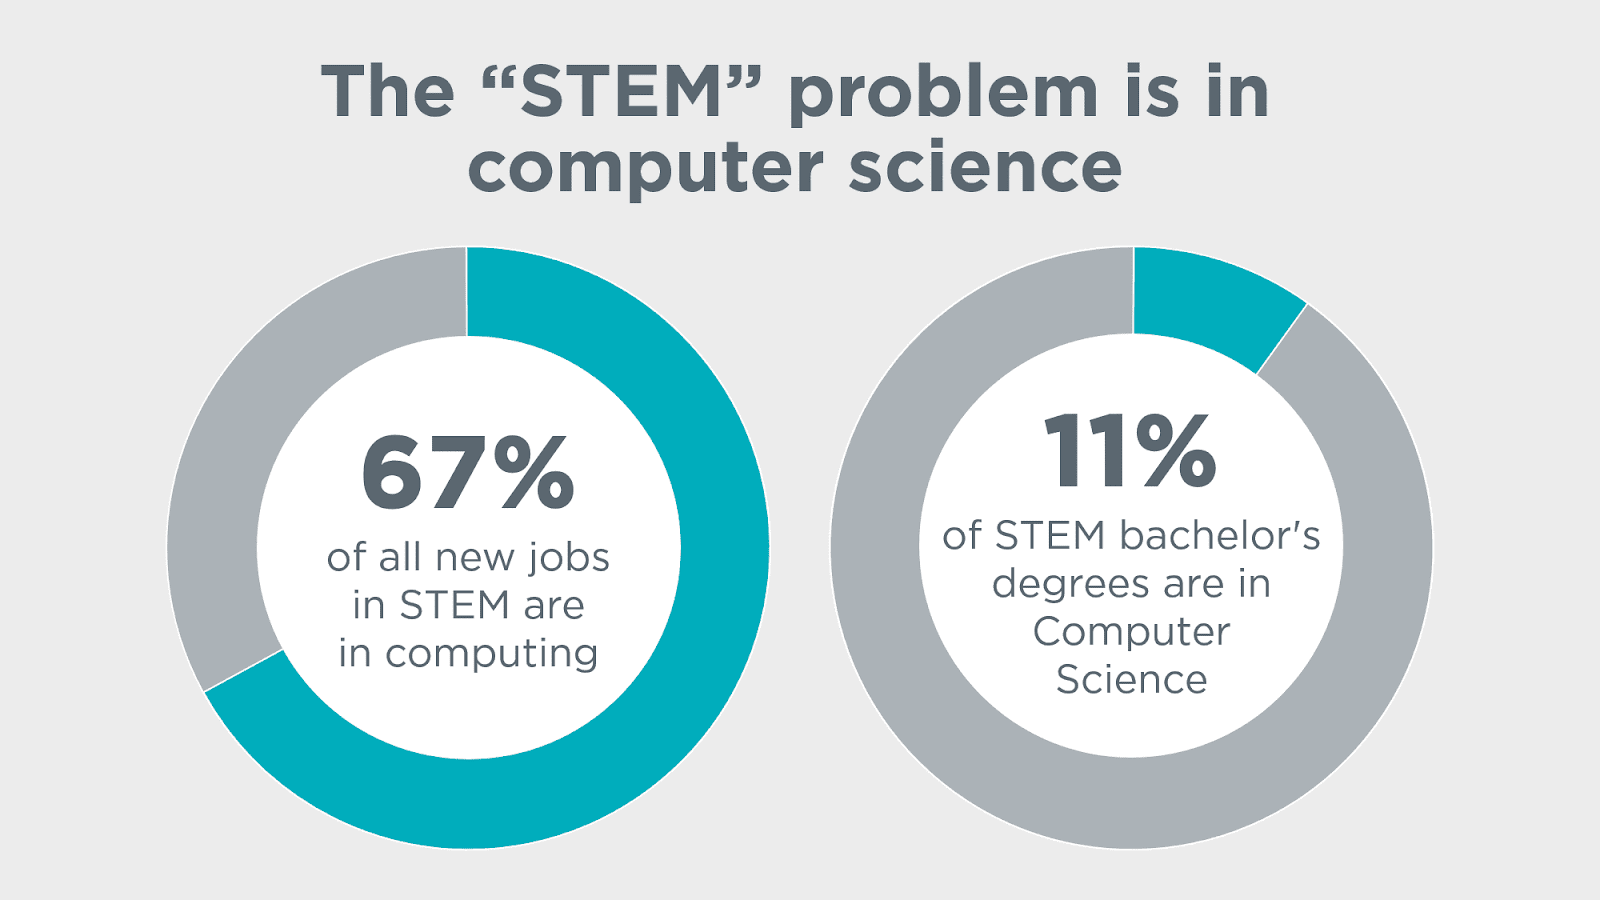 The stem problem is in computer science. 